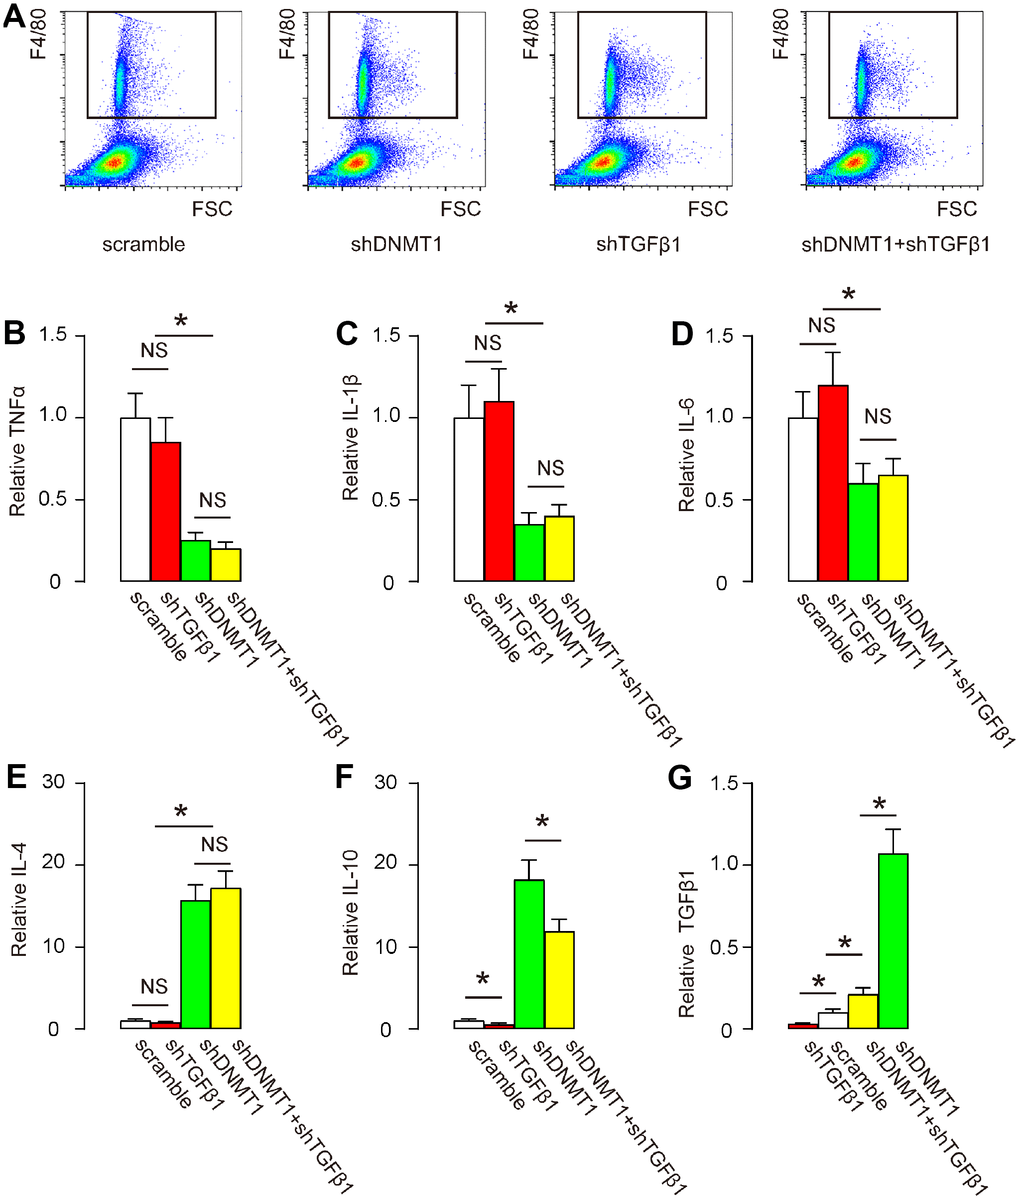 Effects of AAVs on cytokine production by macrophages. (A) F4/80+ macrophages in the degeneration zone were isolated by flow cytometry, as shown by representative flow charts. (B–G) ELISA for TNFα (B) IL-1β (C) IL-6 (D) IL-4 (E) IL-10 (F) and TGFβ1 (G). *p